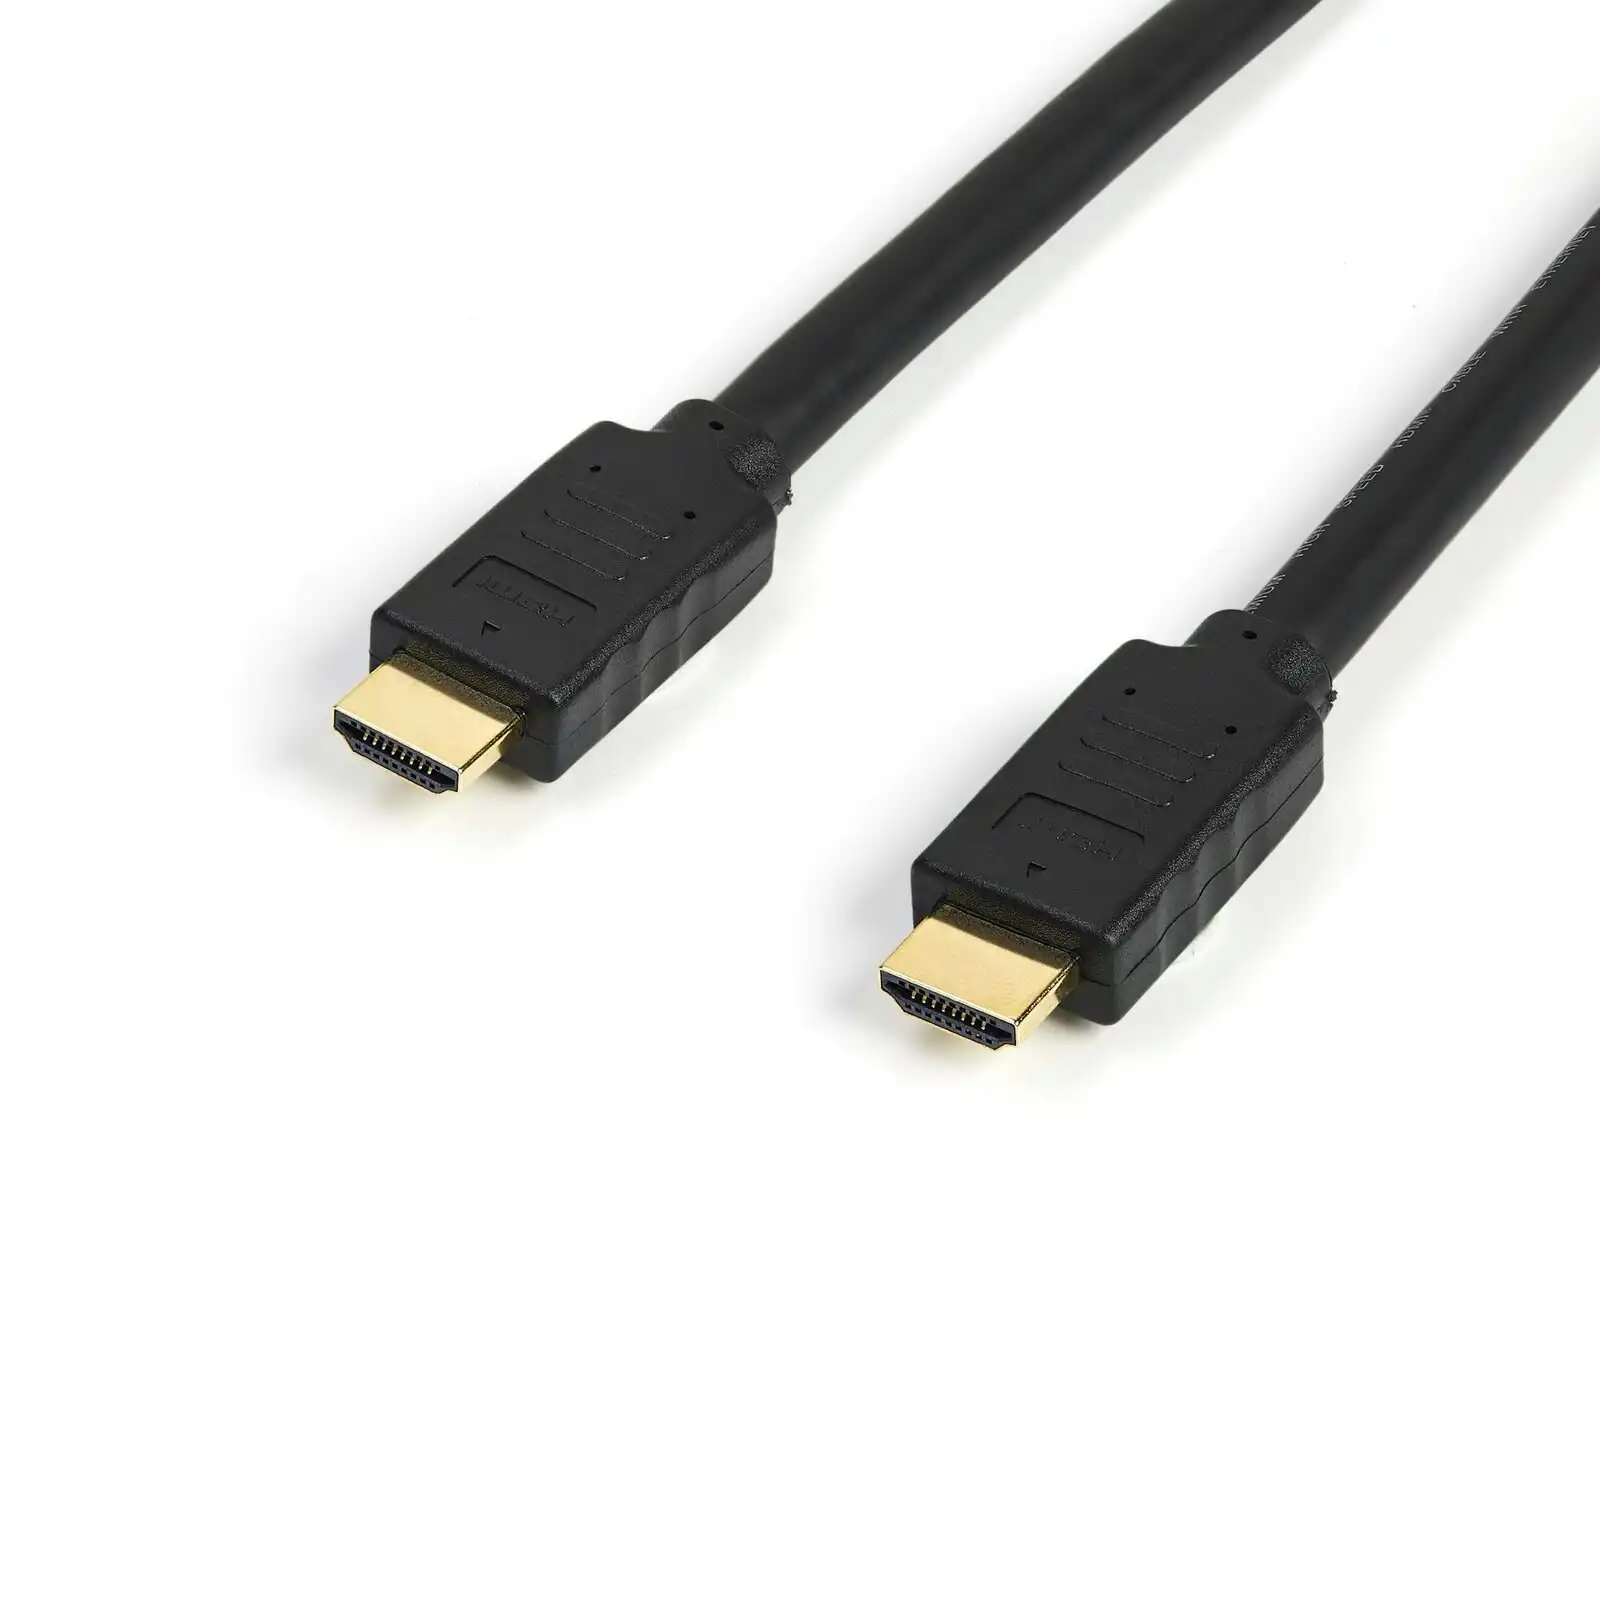 Star Tech 4K/Ultra HD 18G HDR Premium HDMI High Speed Cable w/ Ethernet 5m Black